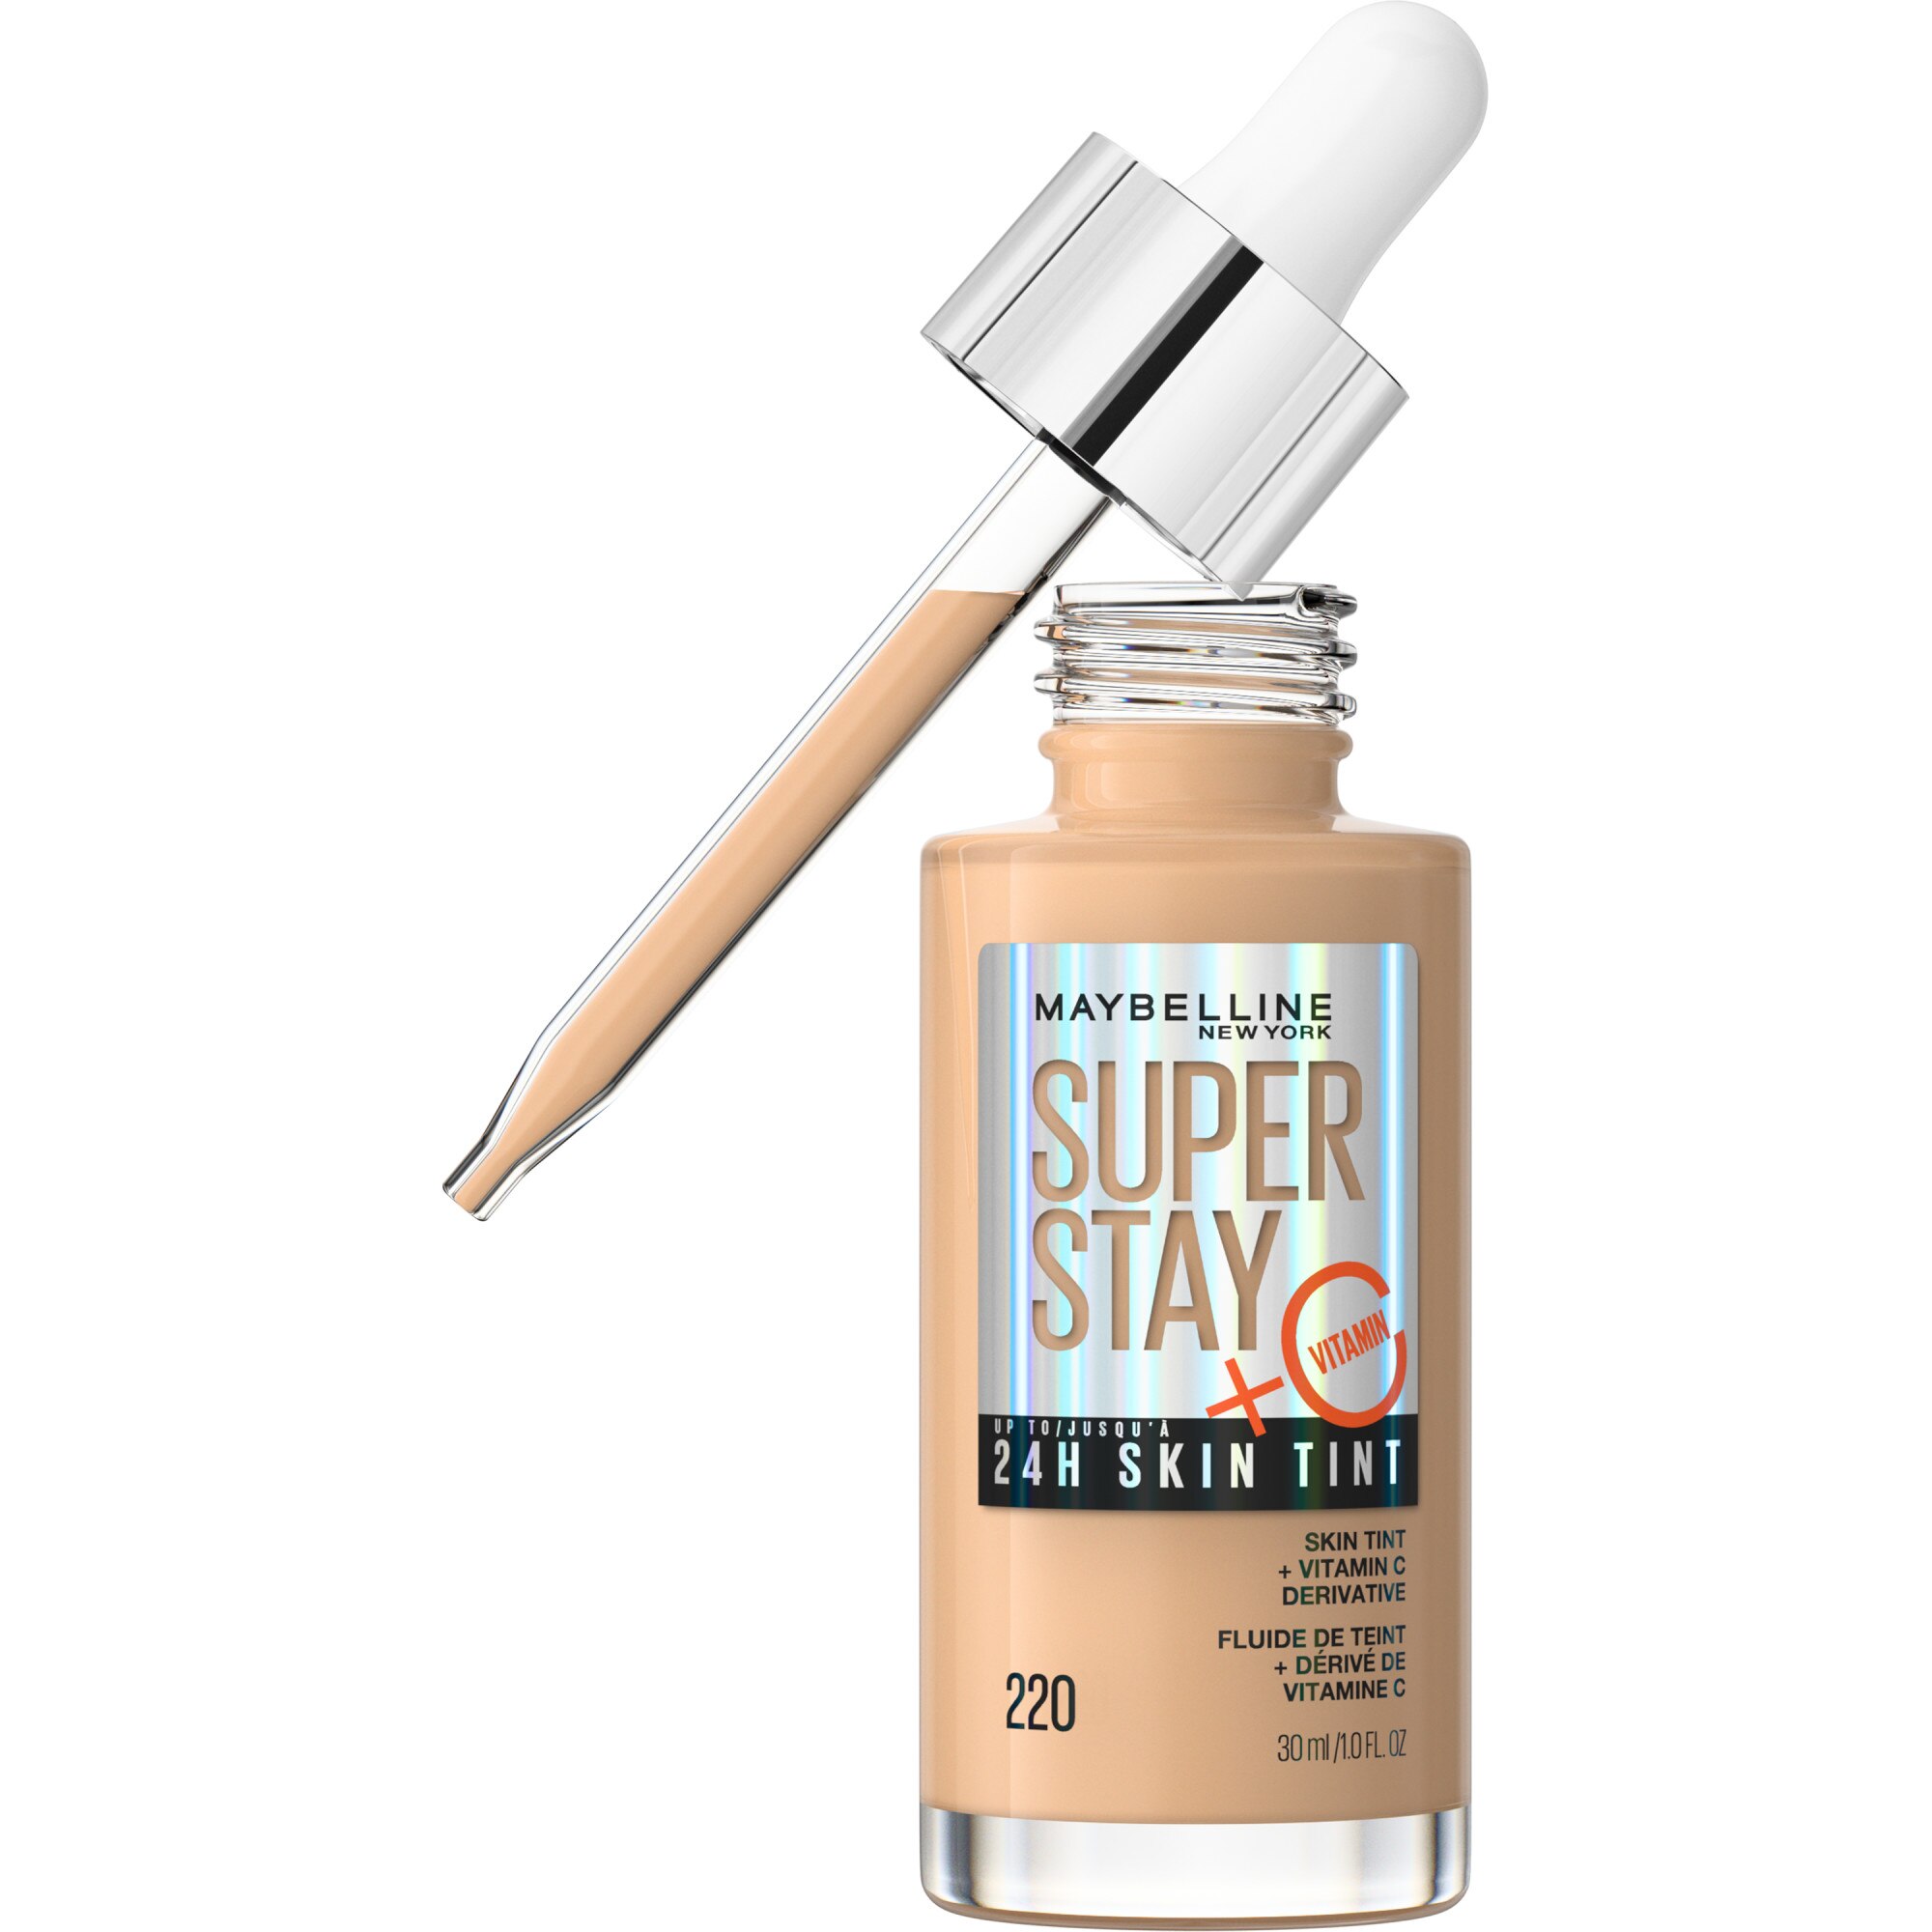 Maybelline New York Super Stay Up To 24HR Skin Tint With Vitamin C, 220, 1 Oz , CVS